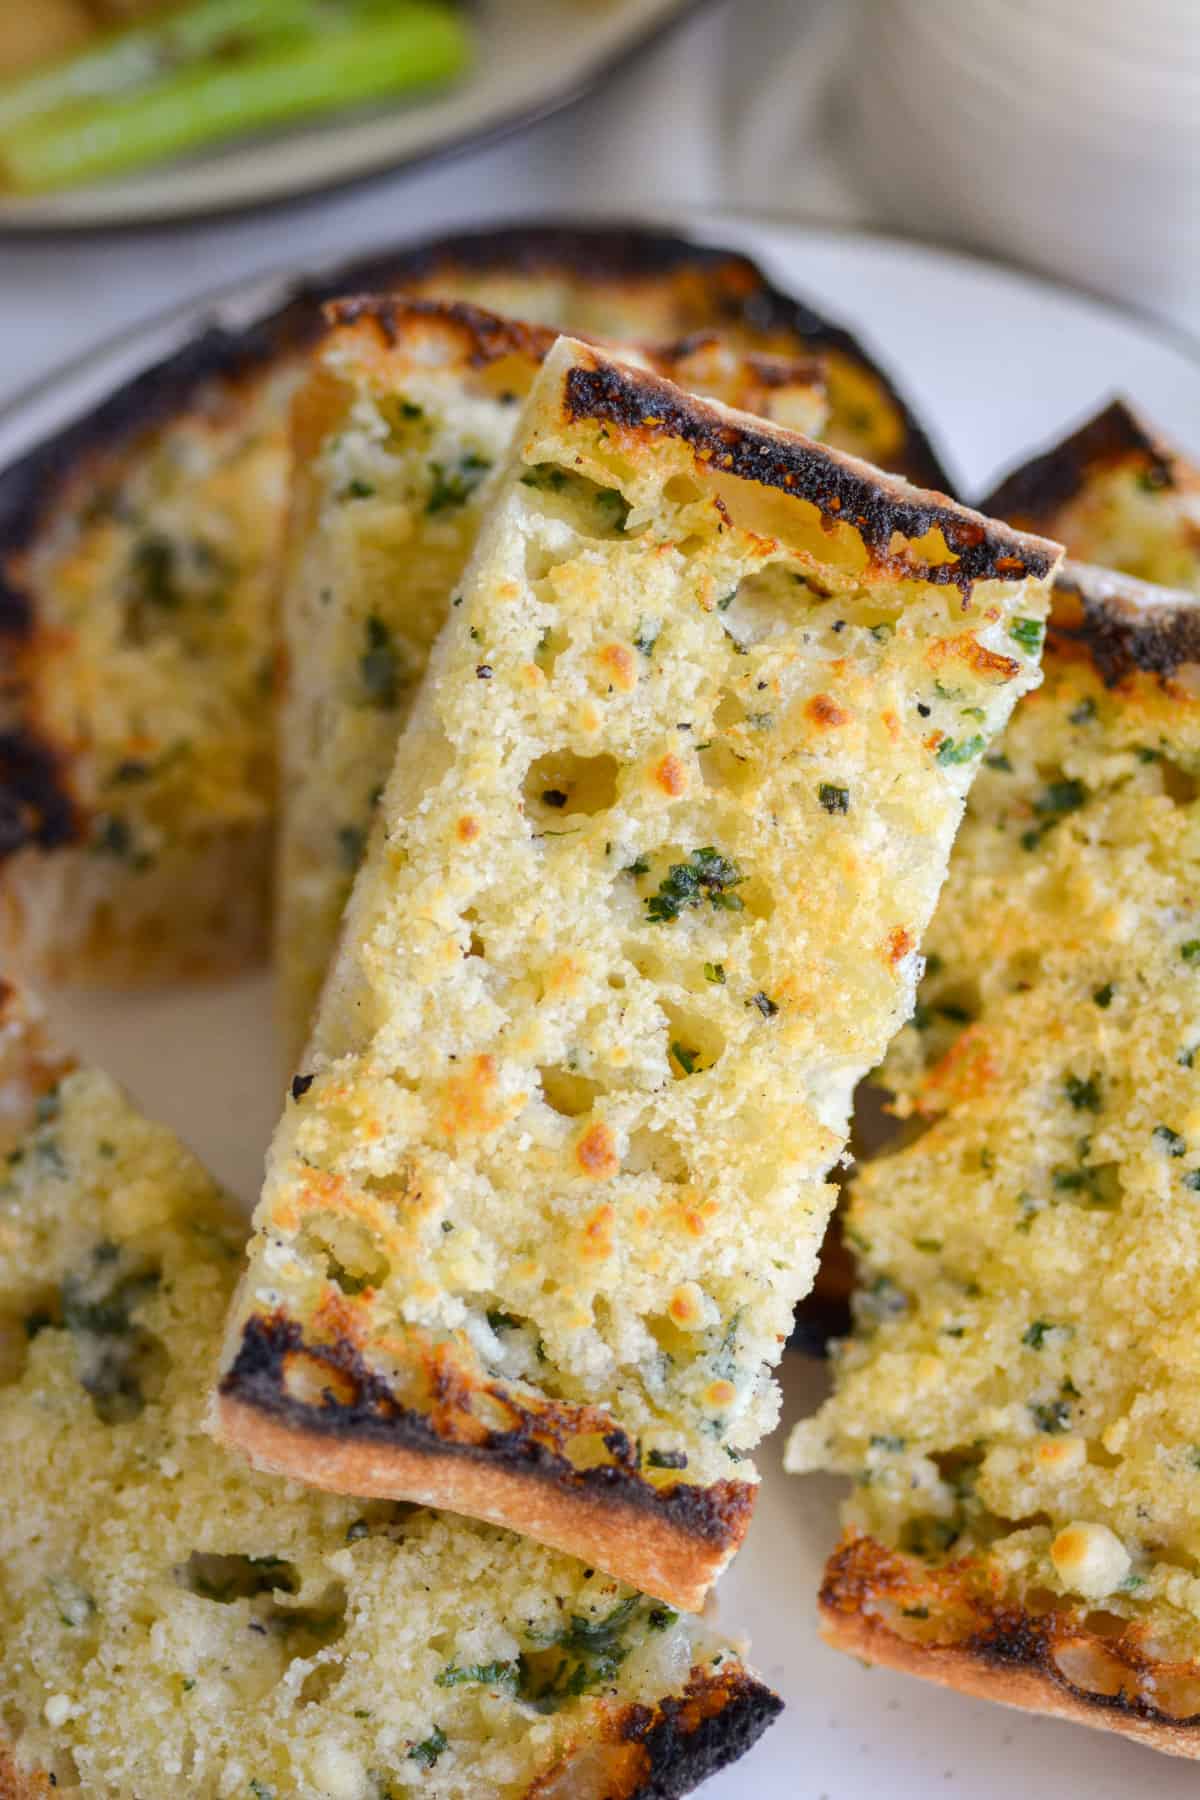 Vegan Cheesy Garlic Bread on a plate with other slices of garlic bread.